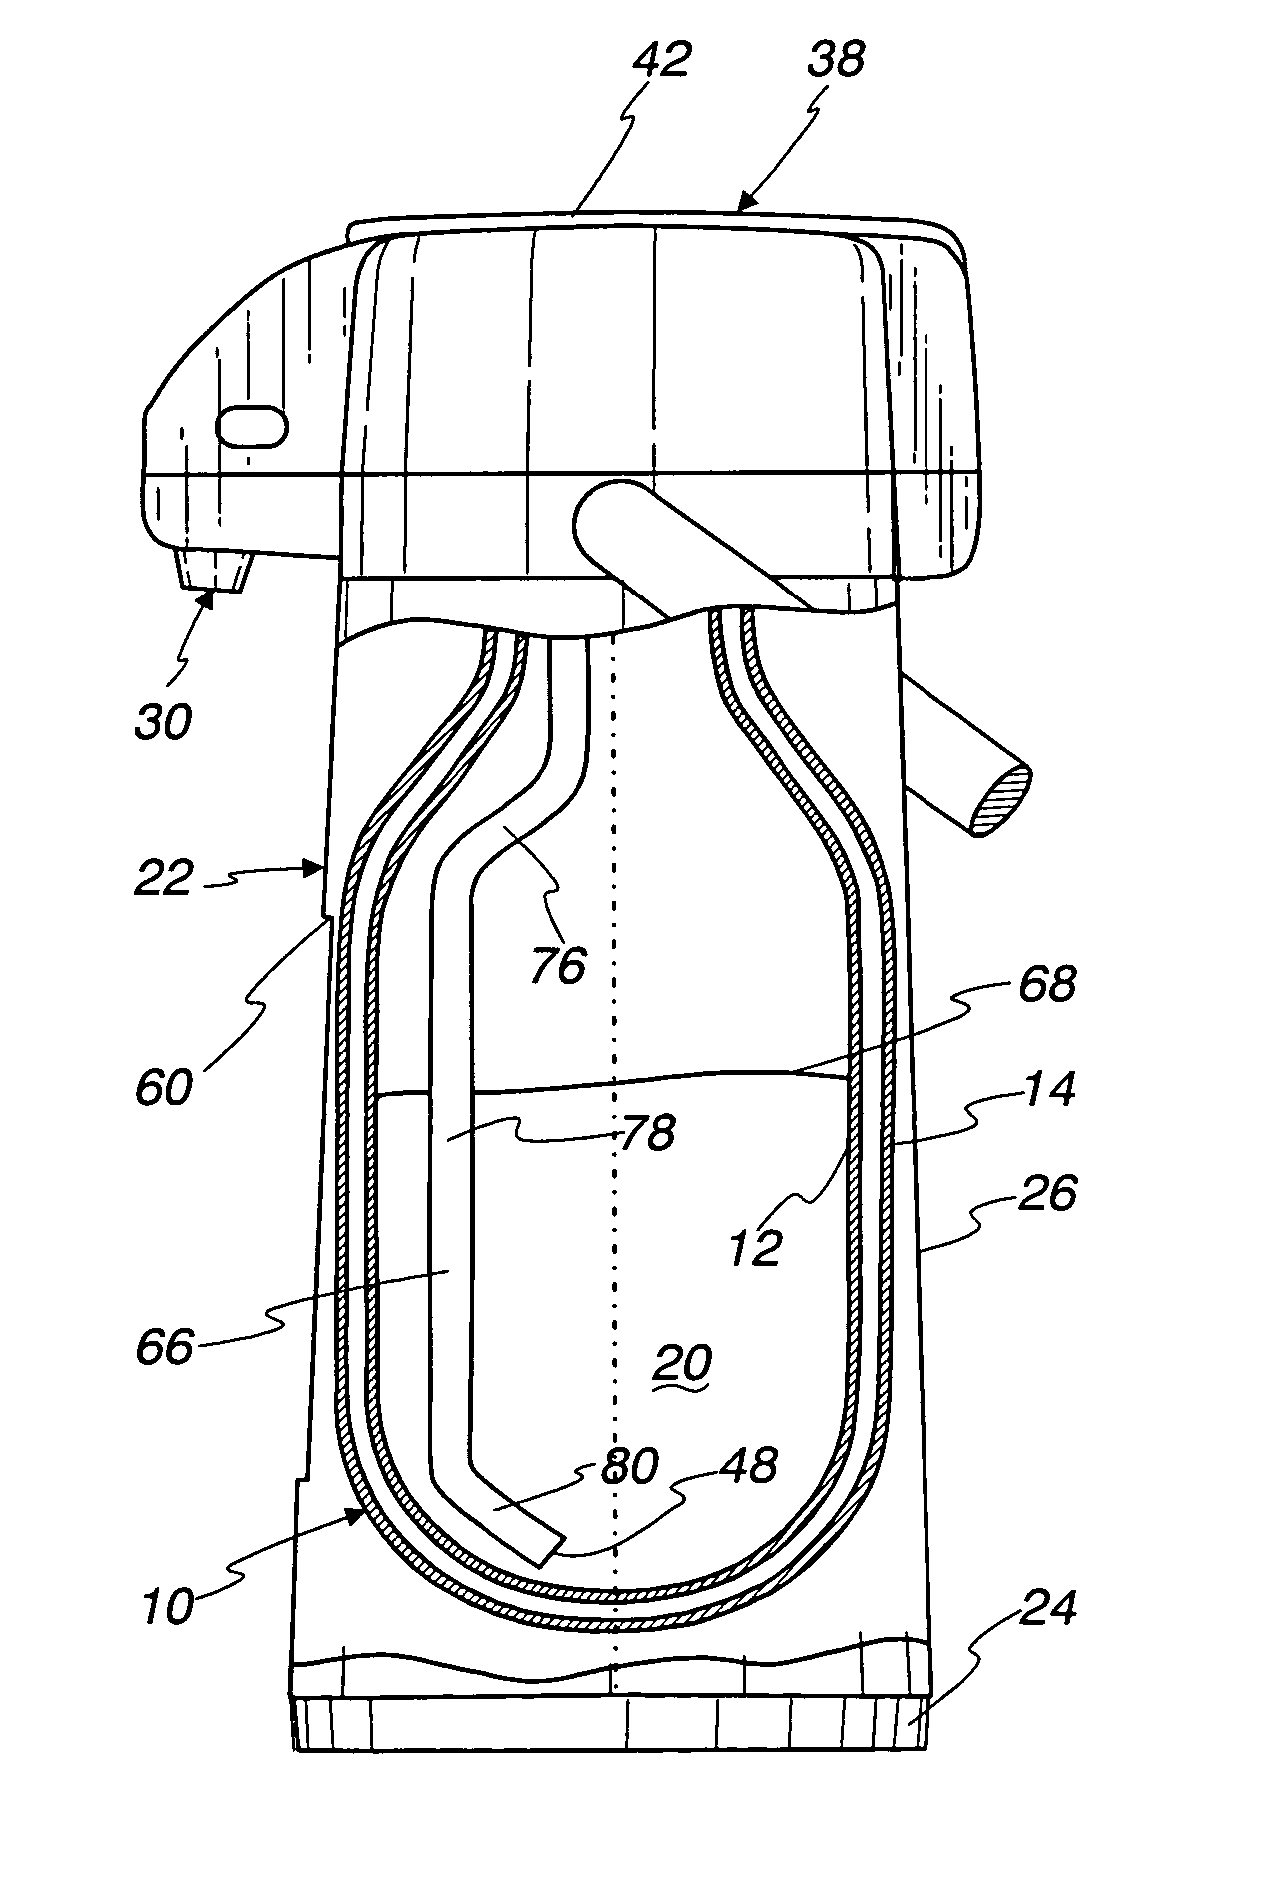 Carafe with contents volume indicator